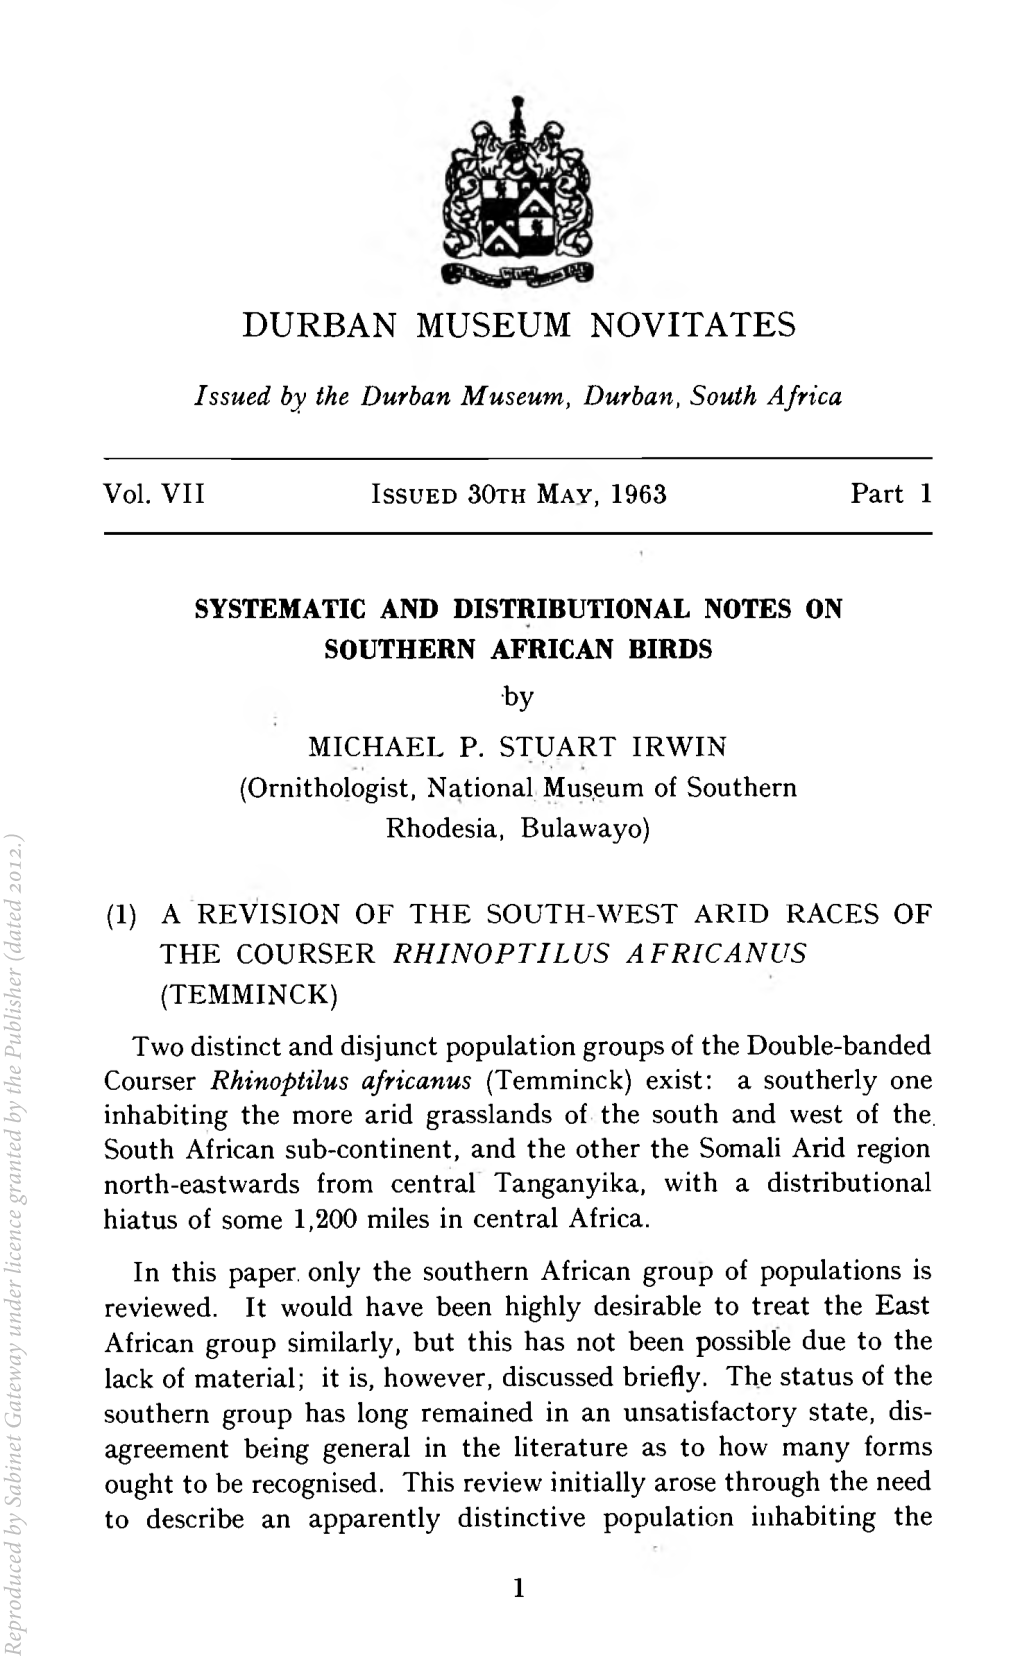 Systematic and Distributional Notes on Southern African Birds.Pdf